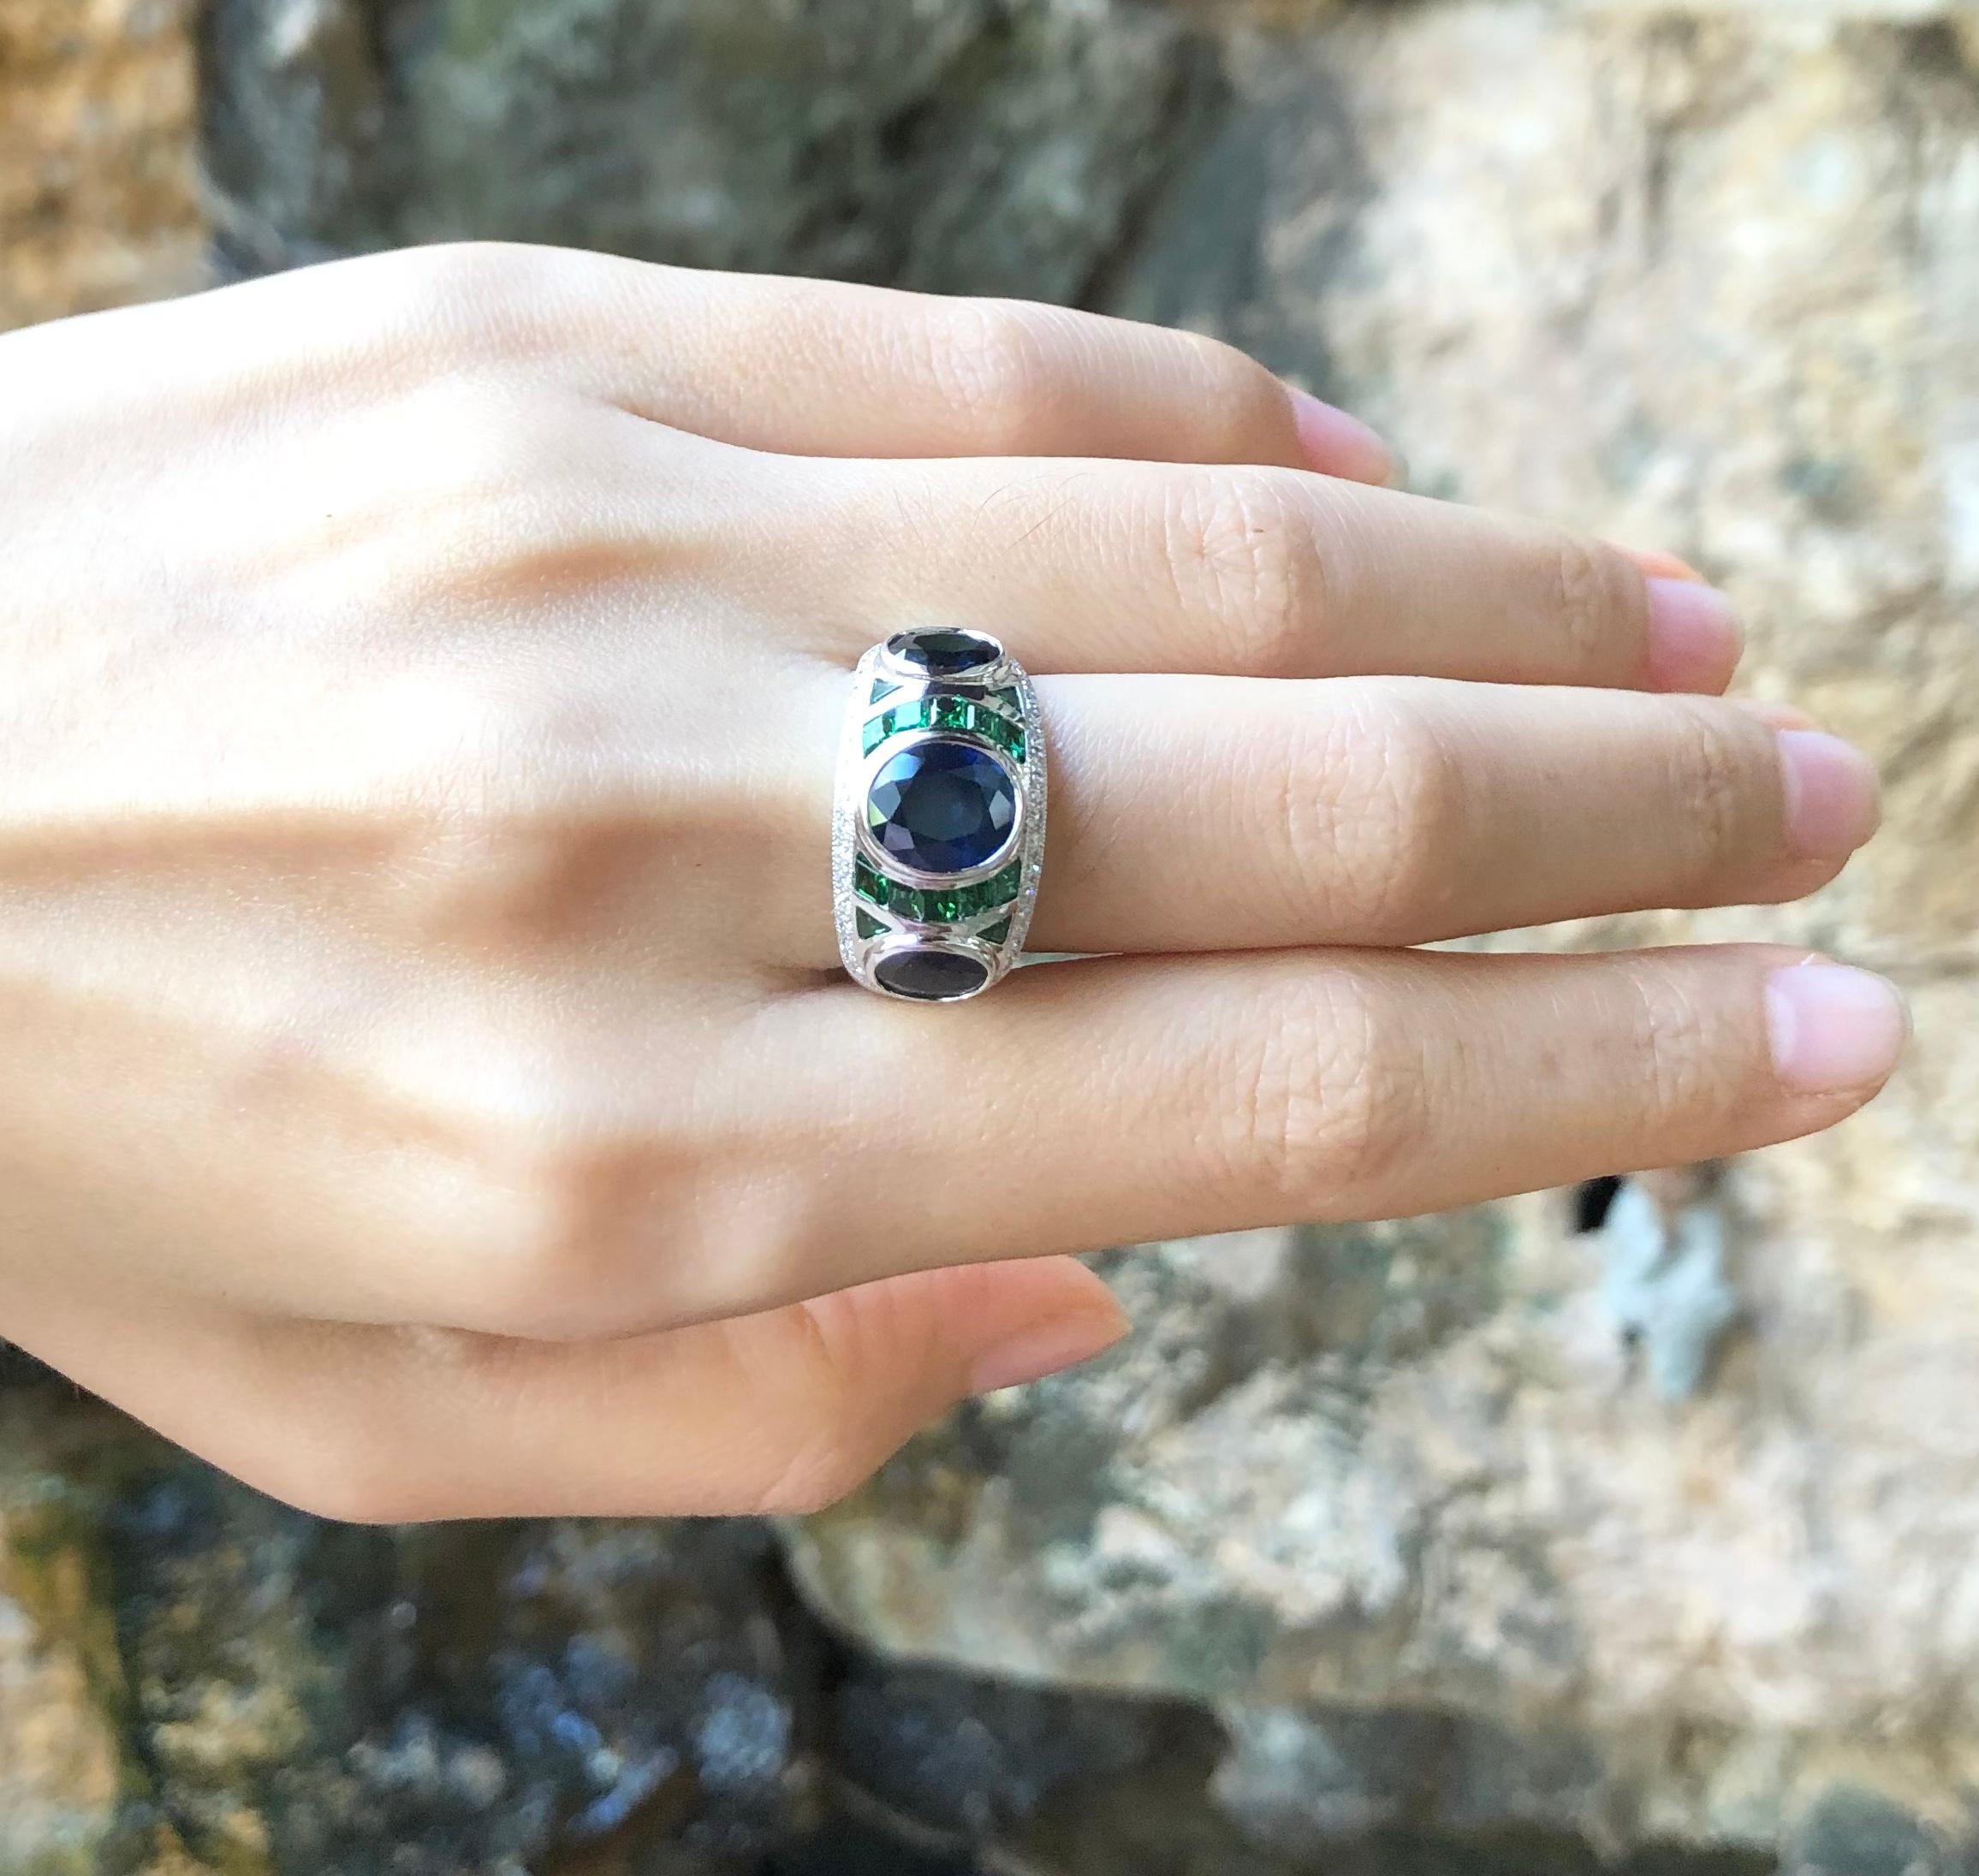 Blue Sapphire 2.83 carats, Blue Sapphire 2.03 carats, Tsavorite 1.21 carats and Diamond 0.30 carat Ring set in 18 Karat White Gold Settings

Width:  2.3 cm 
Length: 1.2 cm
Ring Size: 54
Total Weight: 11.42 grams

